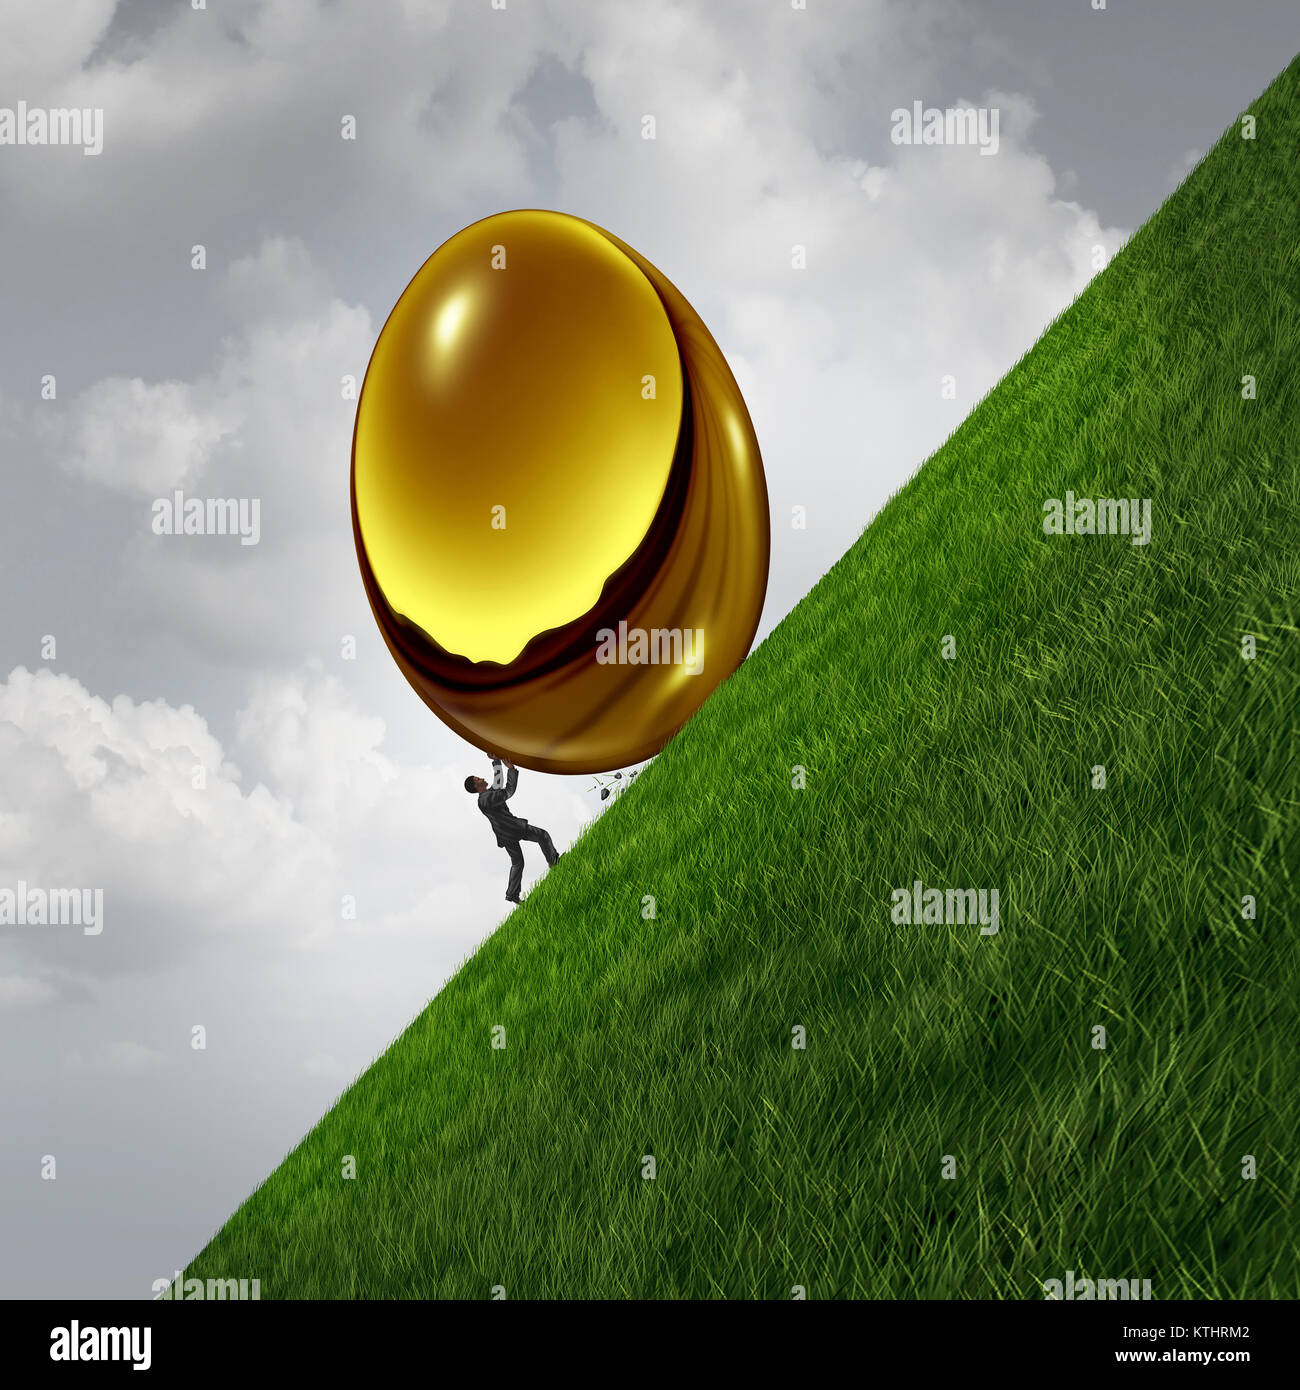 Investment struggle as a business sisyphus metaphor as a businessman pushing a heavy golden egg up a hill as financial challenge symbol. Stock Photo